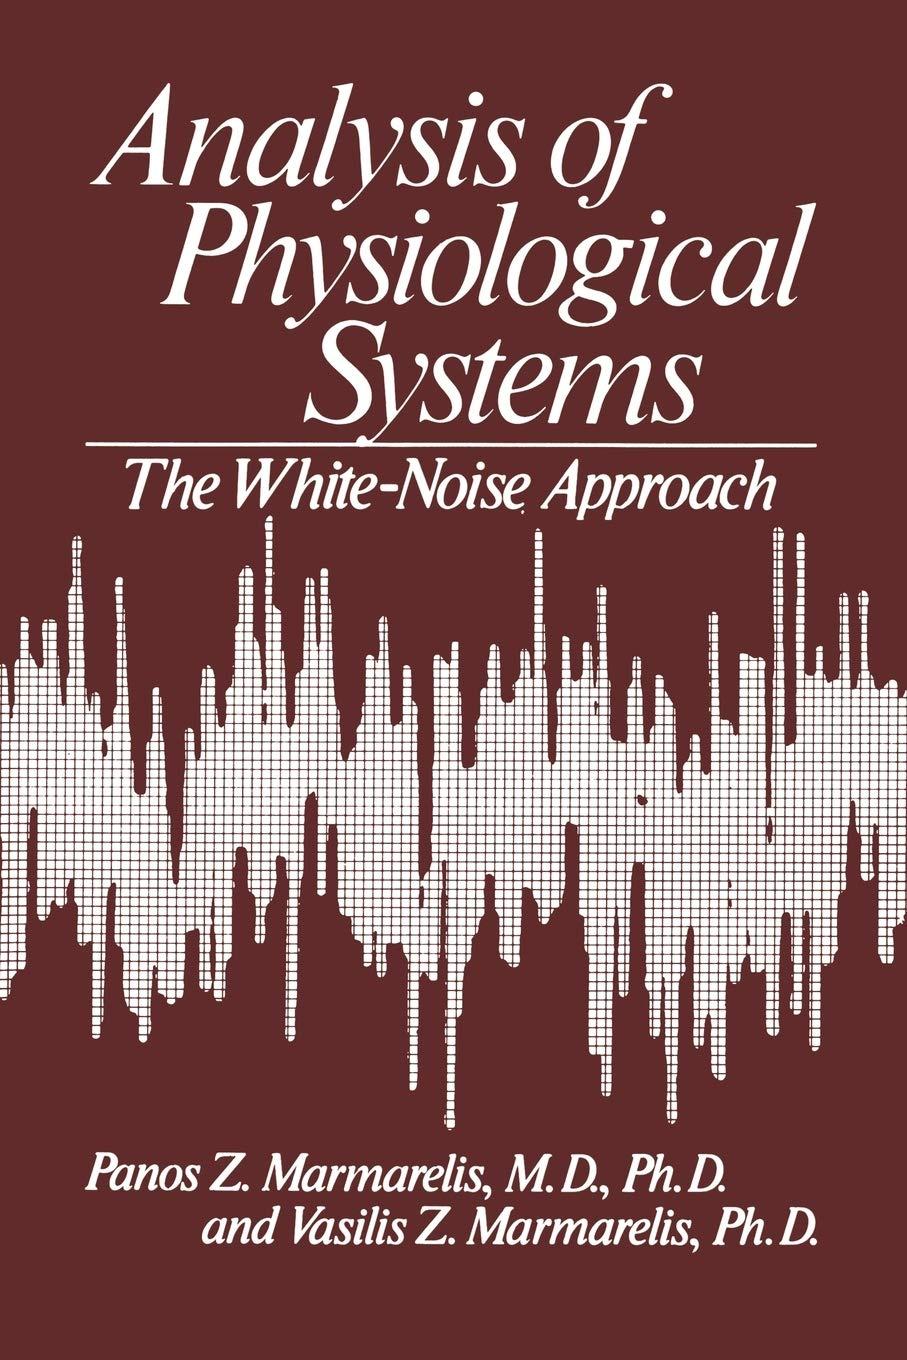 analysis of physiological systems: the white-noise approach 1978th vasilis marmarelis marmarelis,panos z.